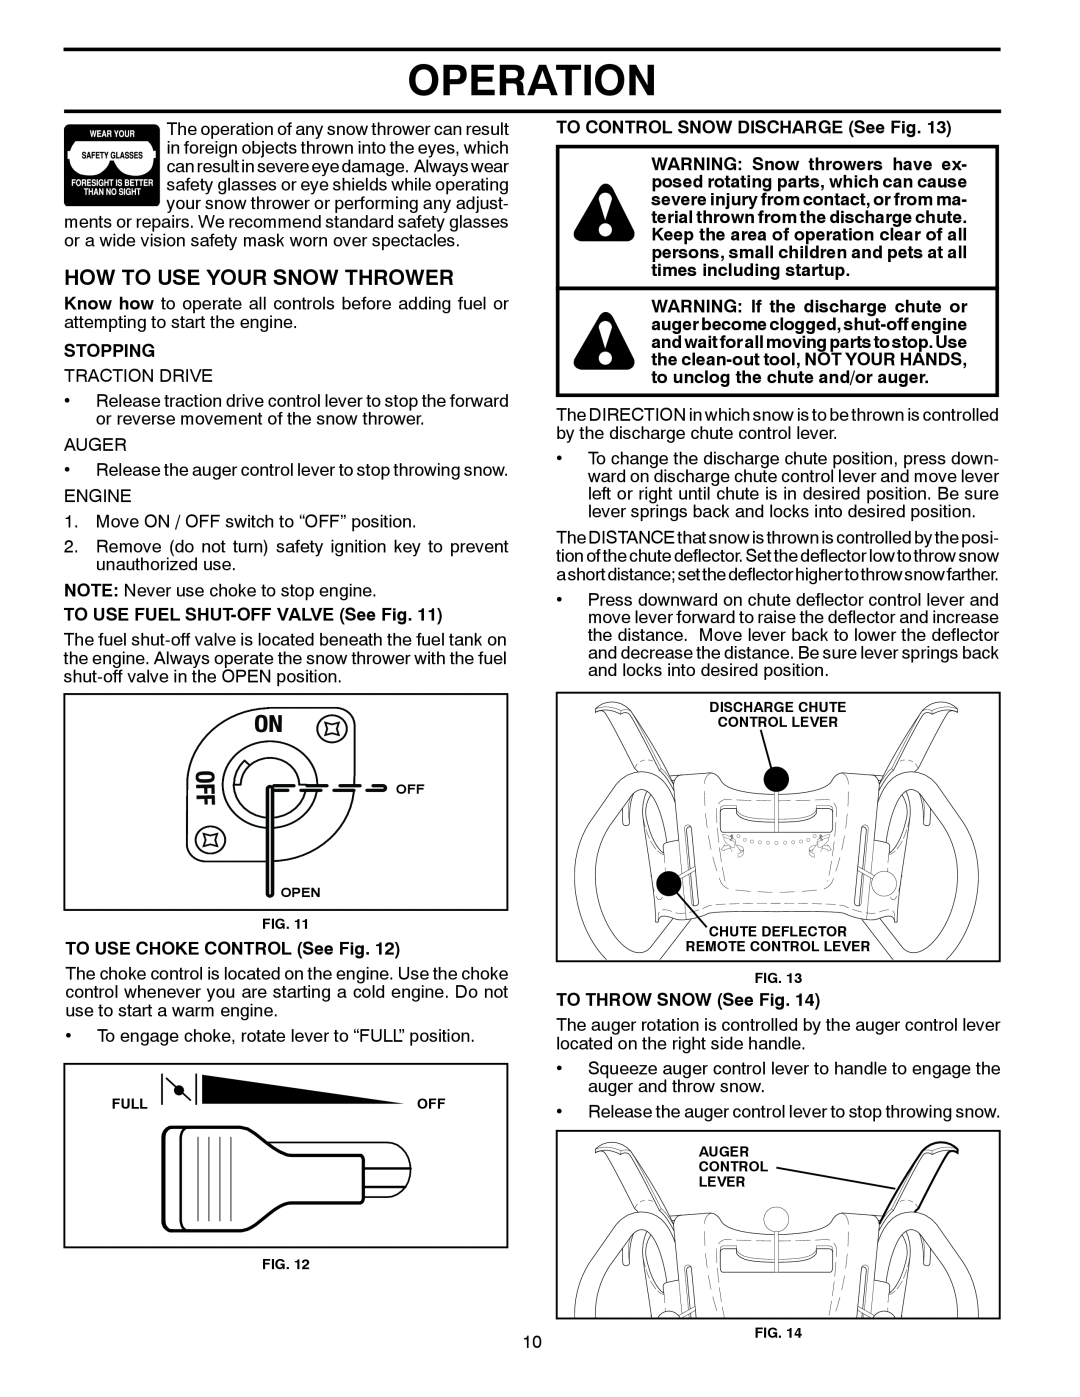 Poulan 435548 How To Use Your Snow Thrower, Operation, Stopping, TO USE FUEL SHUT-OFF VALVE See Fig, TO THROW SNOW See Fig 